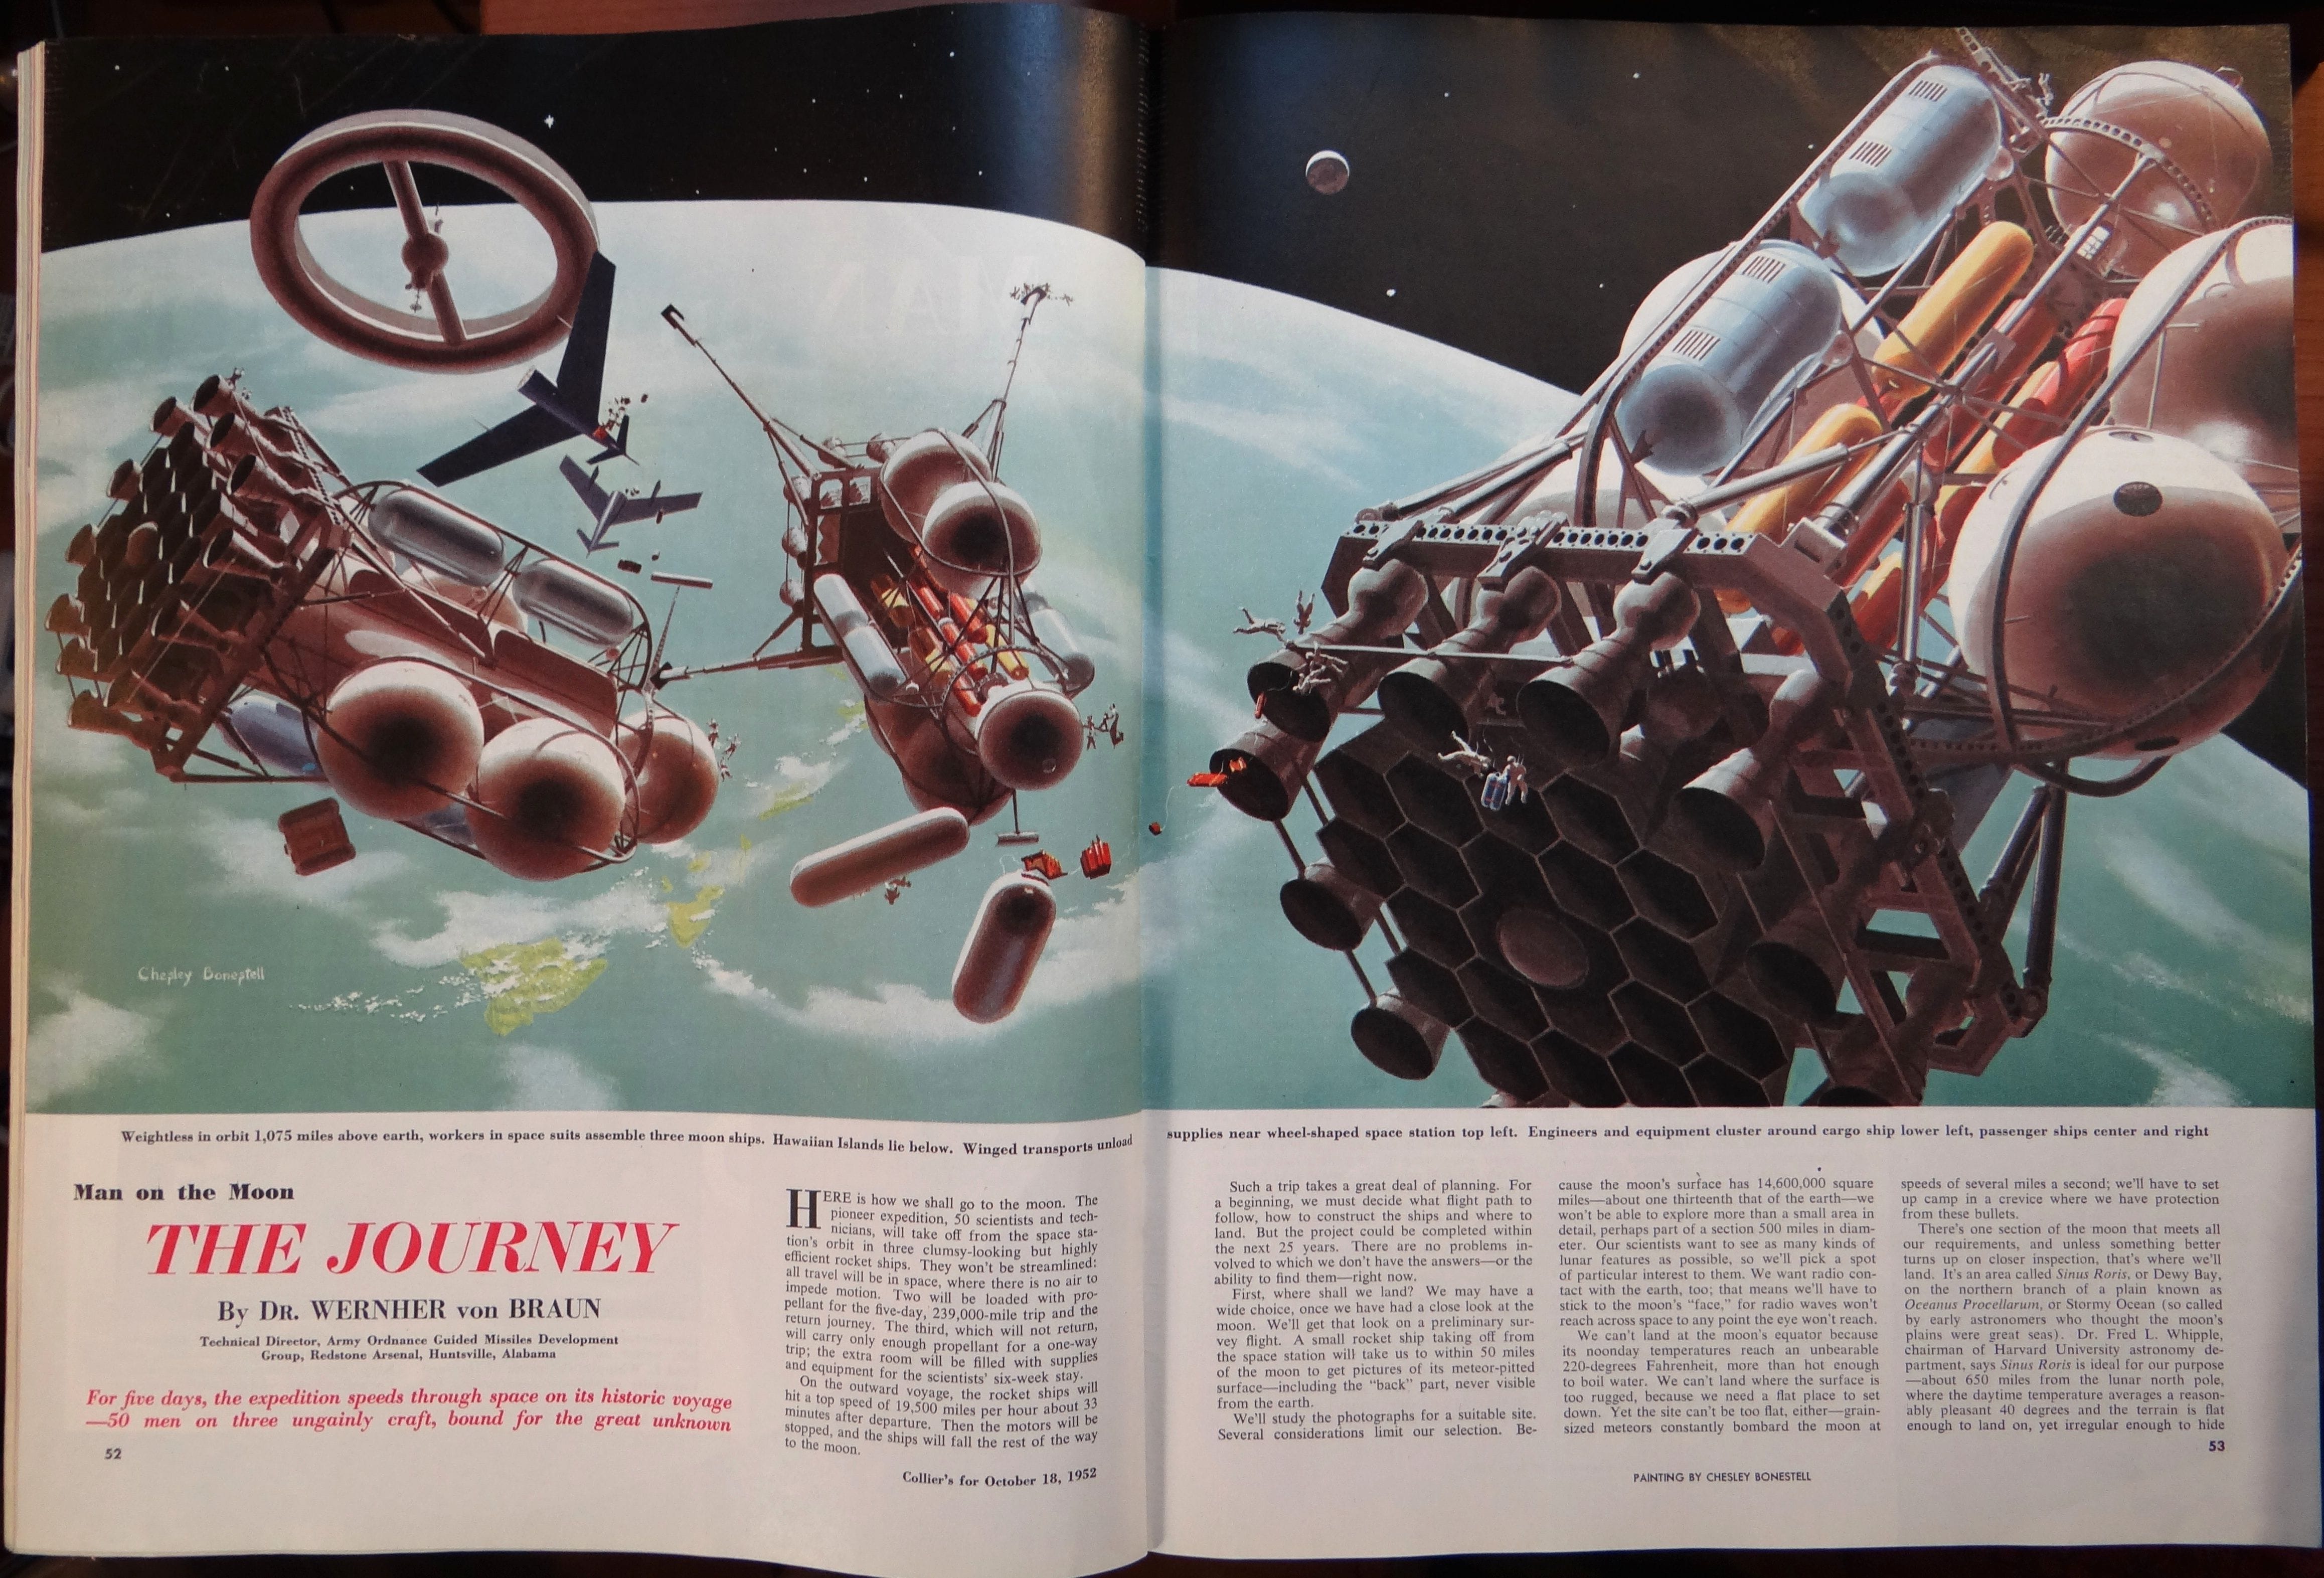 Collier's (October 18, 1952). Pages 52-53. Illustration by Chesley Bonestell